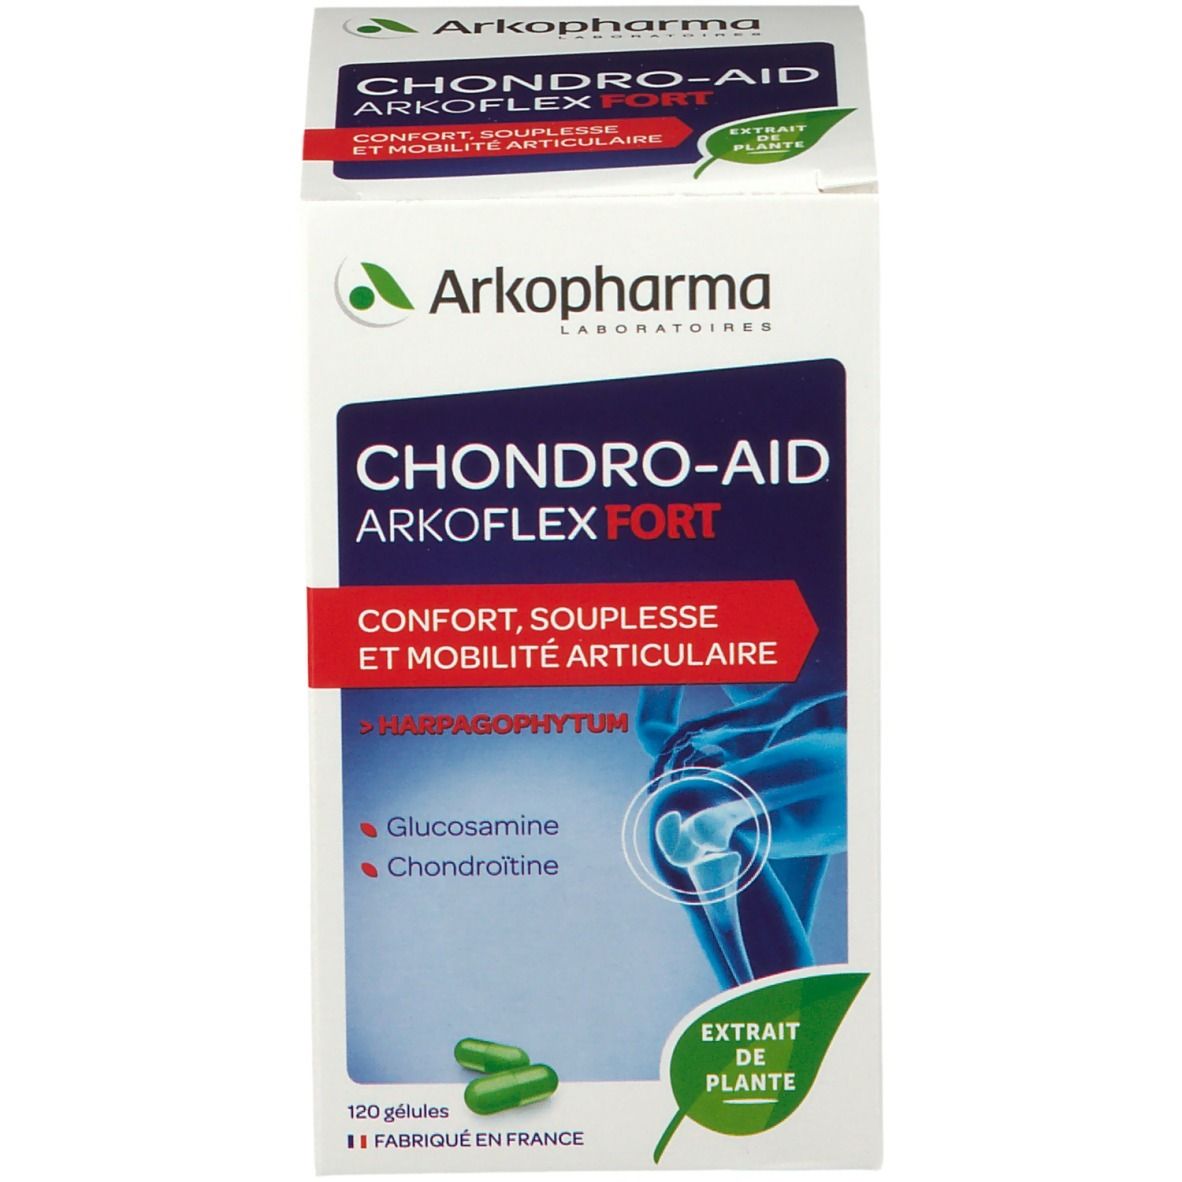 Chondro-Aid Arkoflex Forte